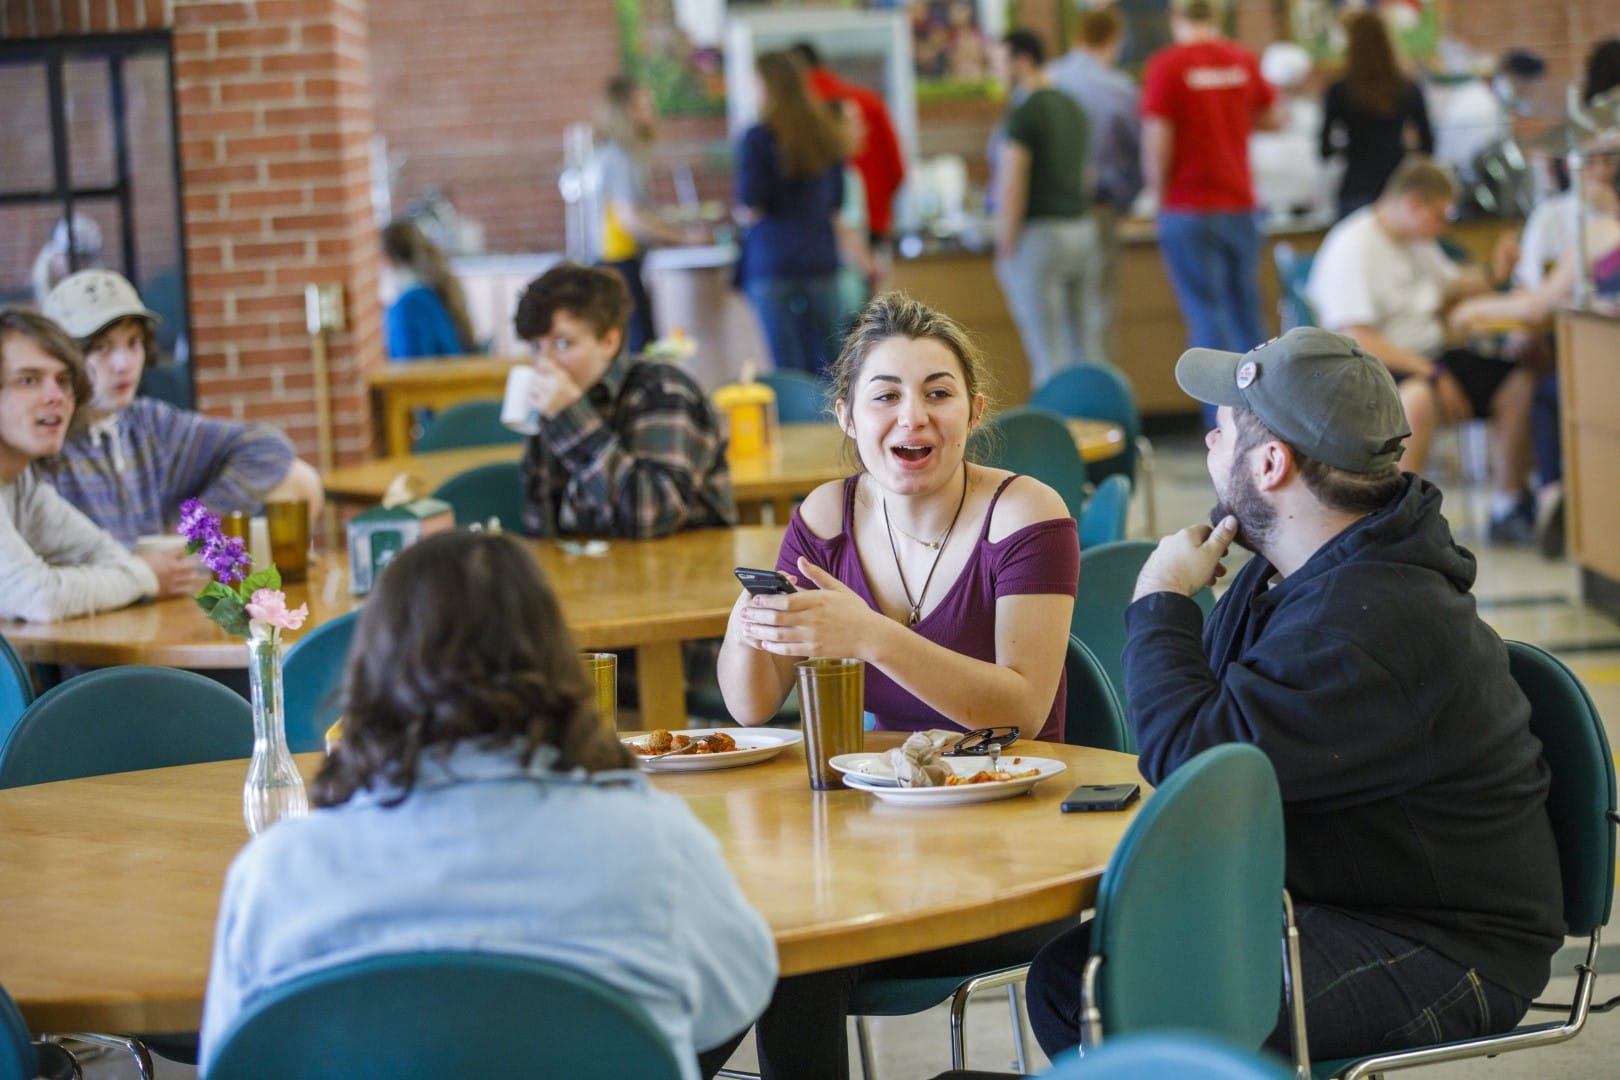 A group of students in a dining hall on the Vermont State University Lyndon campus.